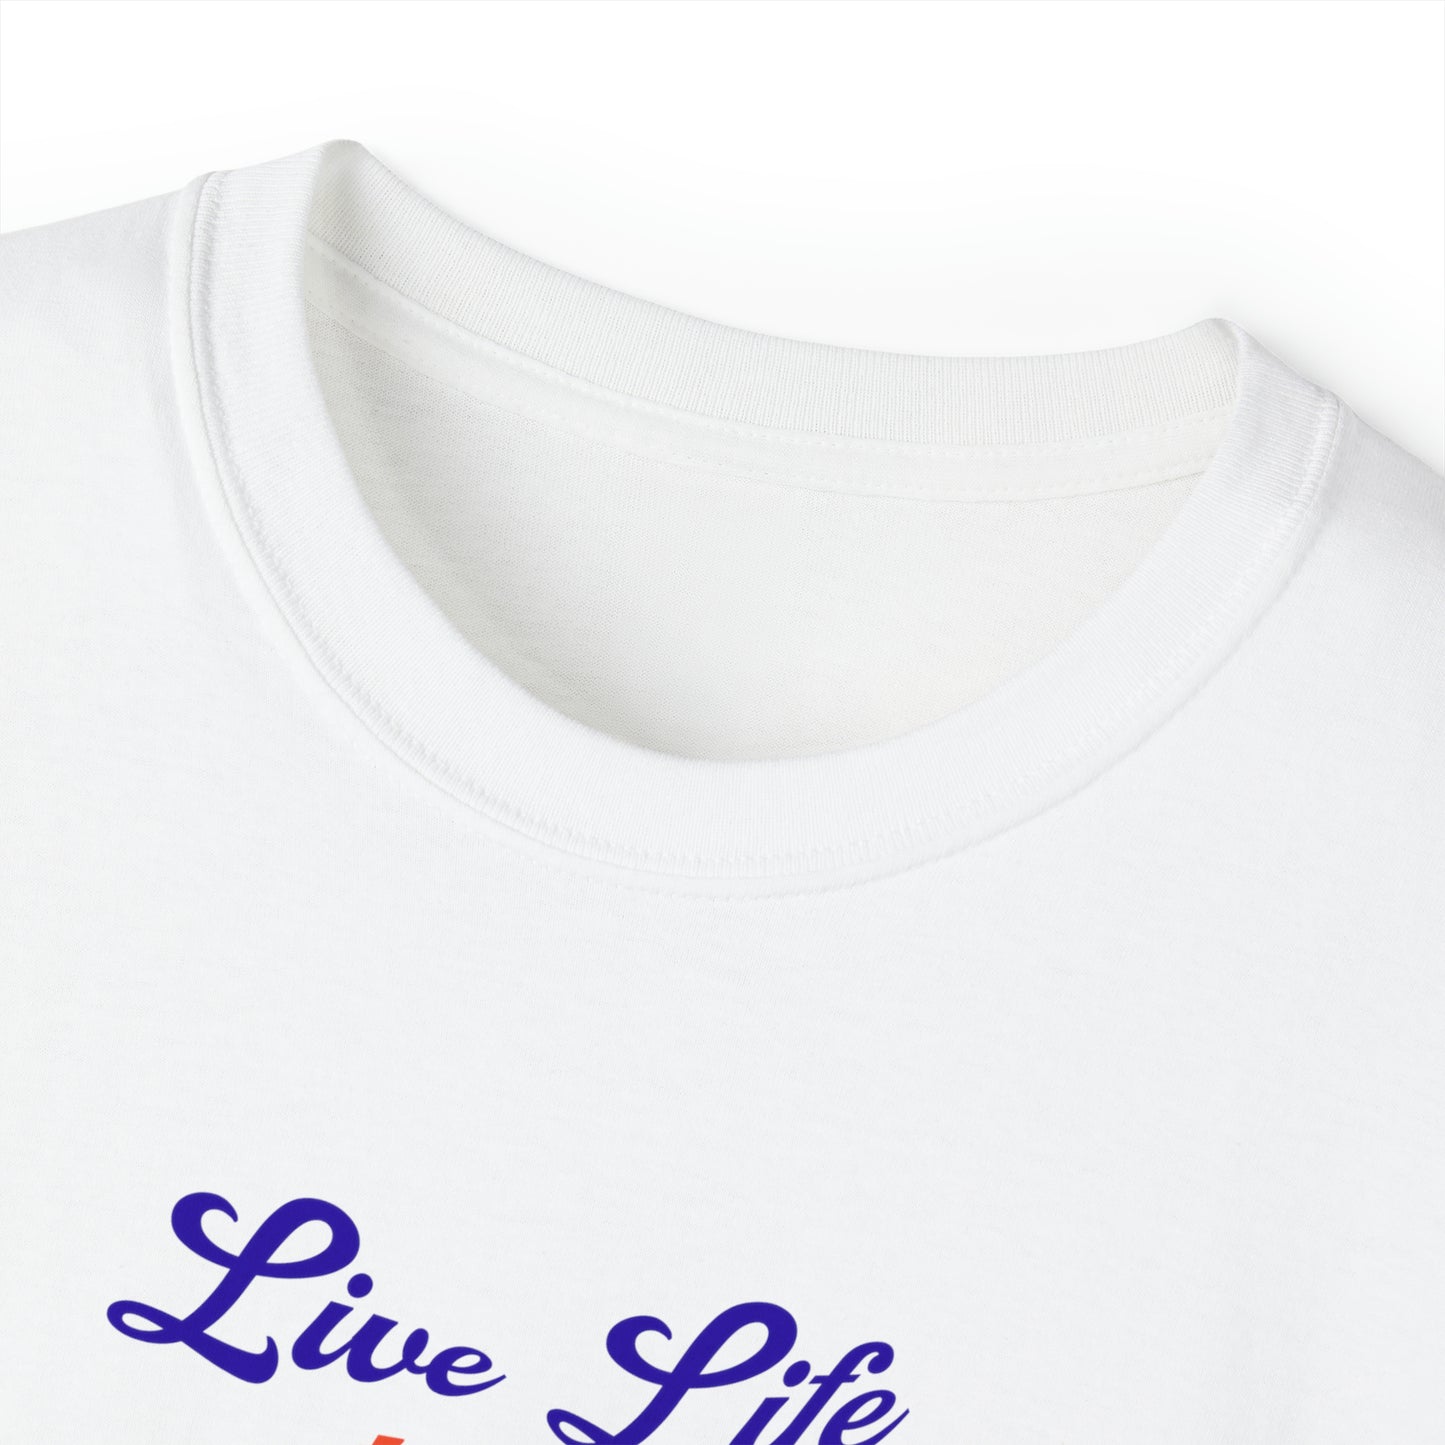 "Live Life" (Colorful Text) - Unisex Ultra Cotton Tee